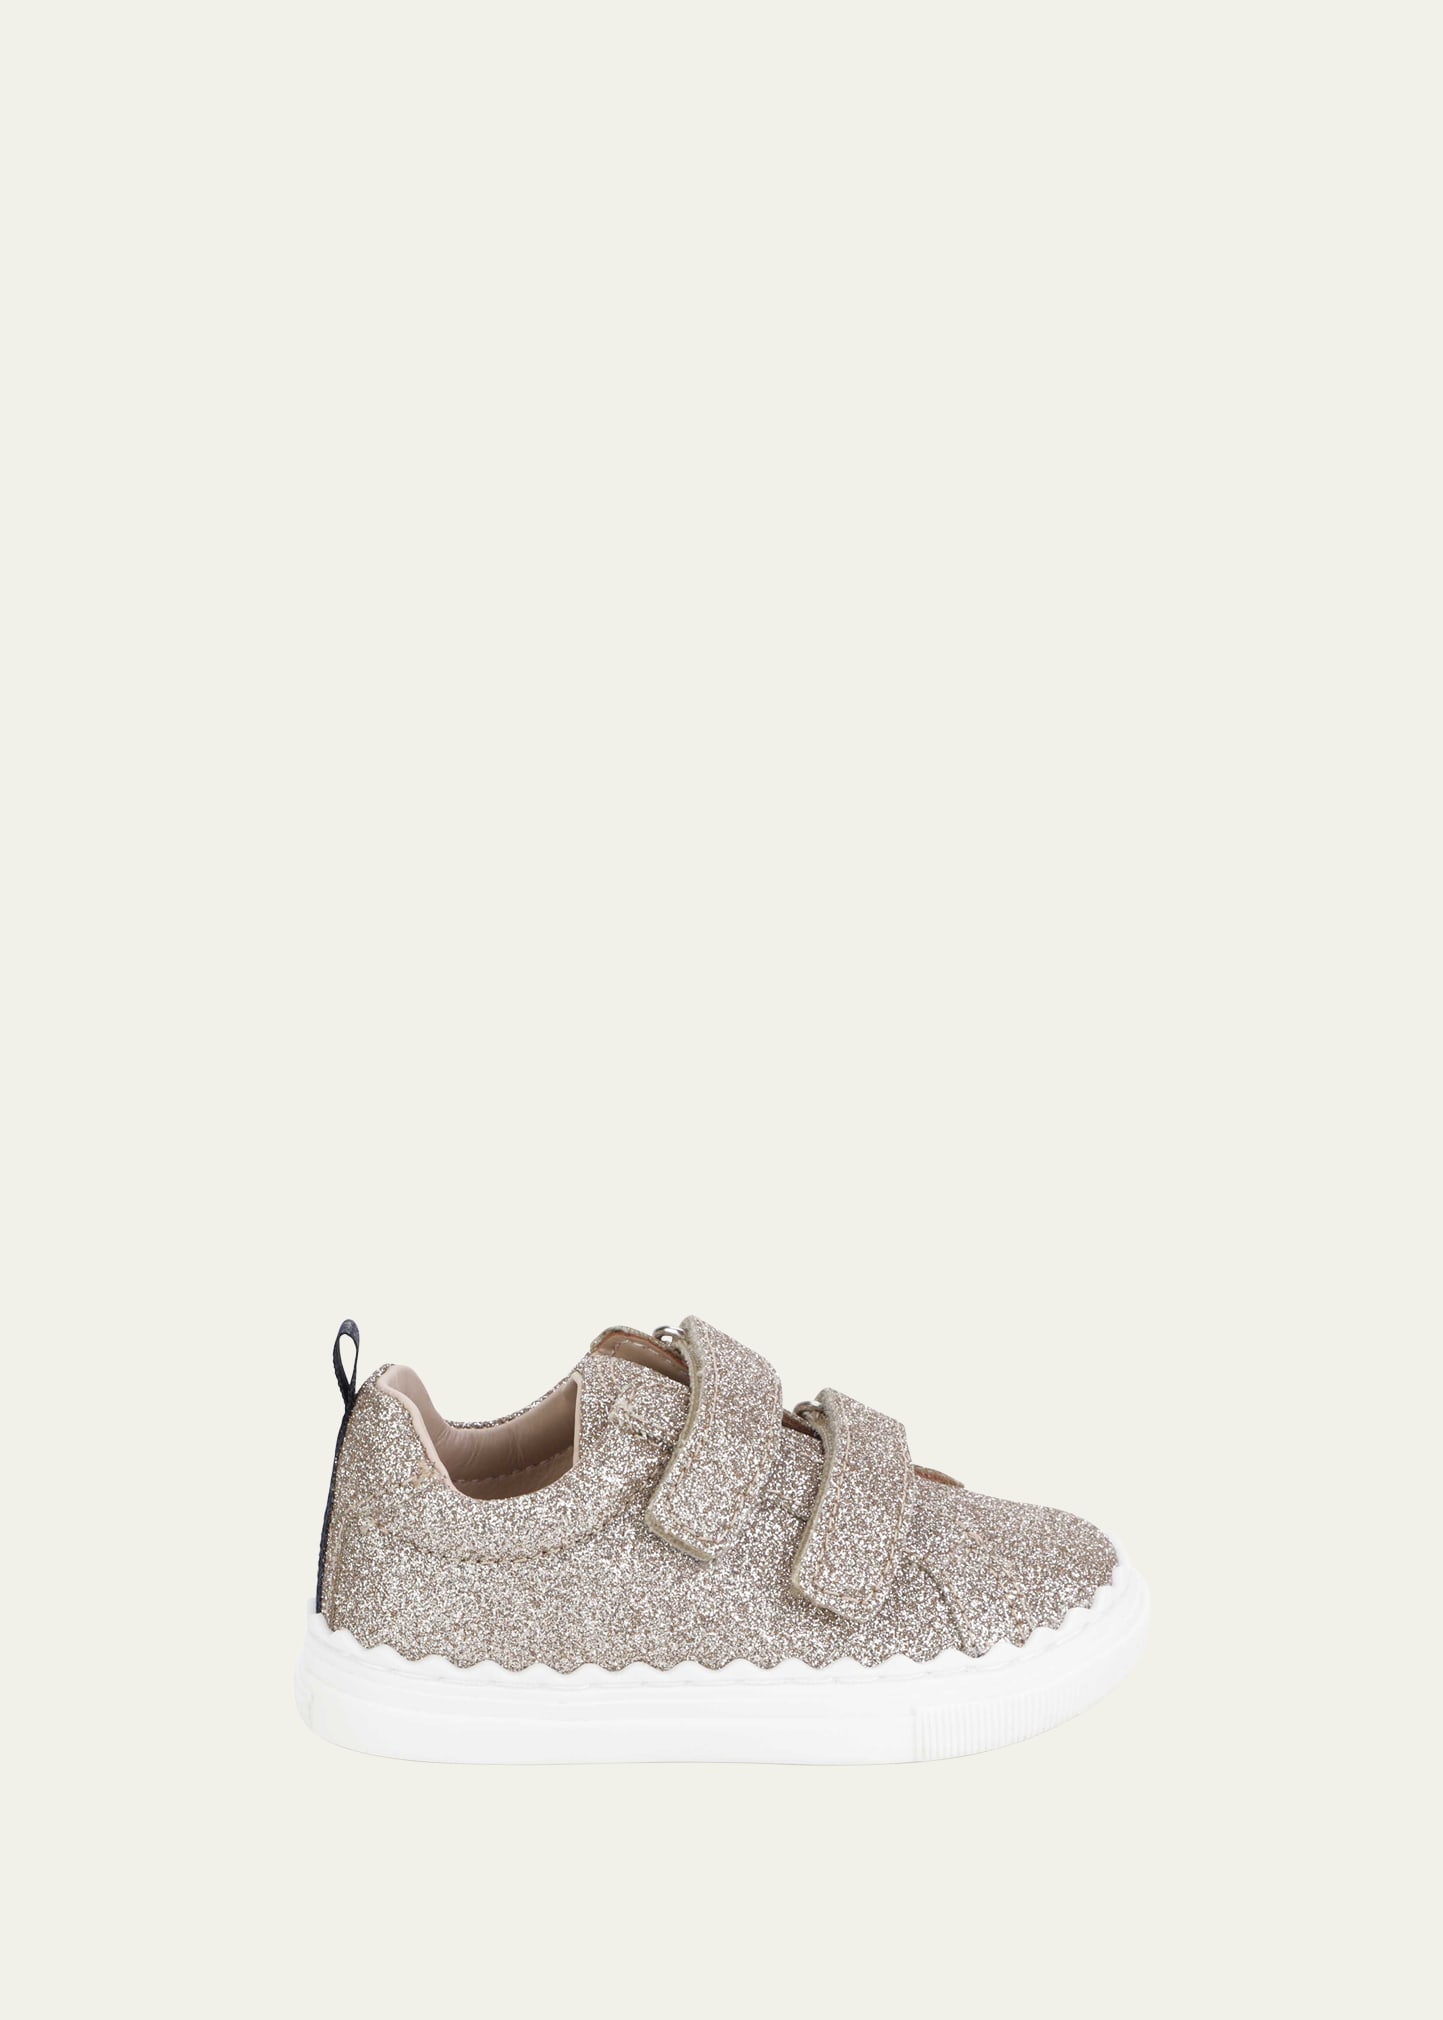 CHLOÉ GIRL'S GRIP STRAP GLITTERY CALF LEATHER SNEAKERS